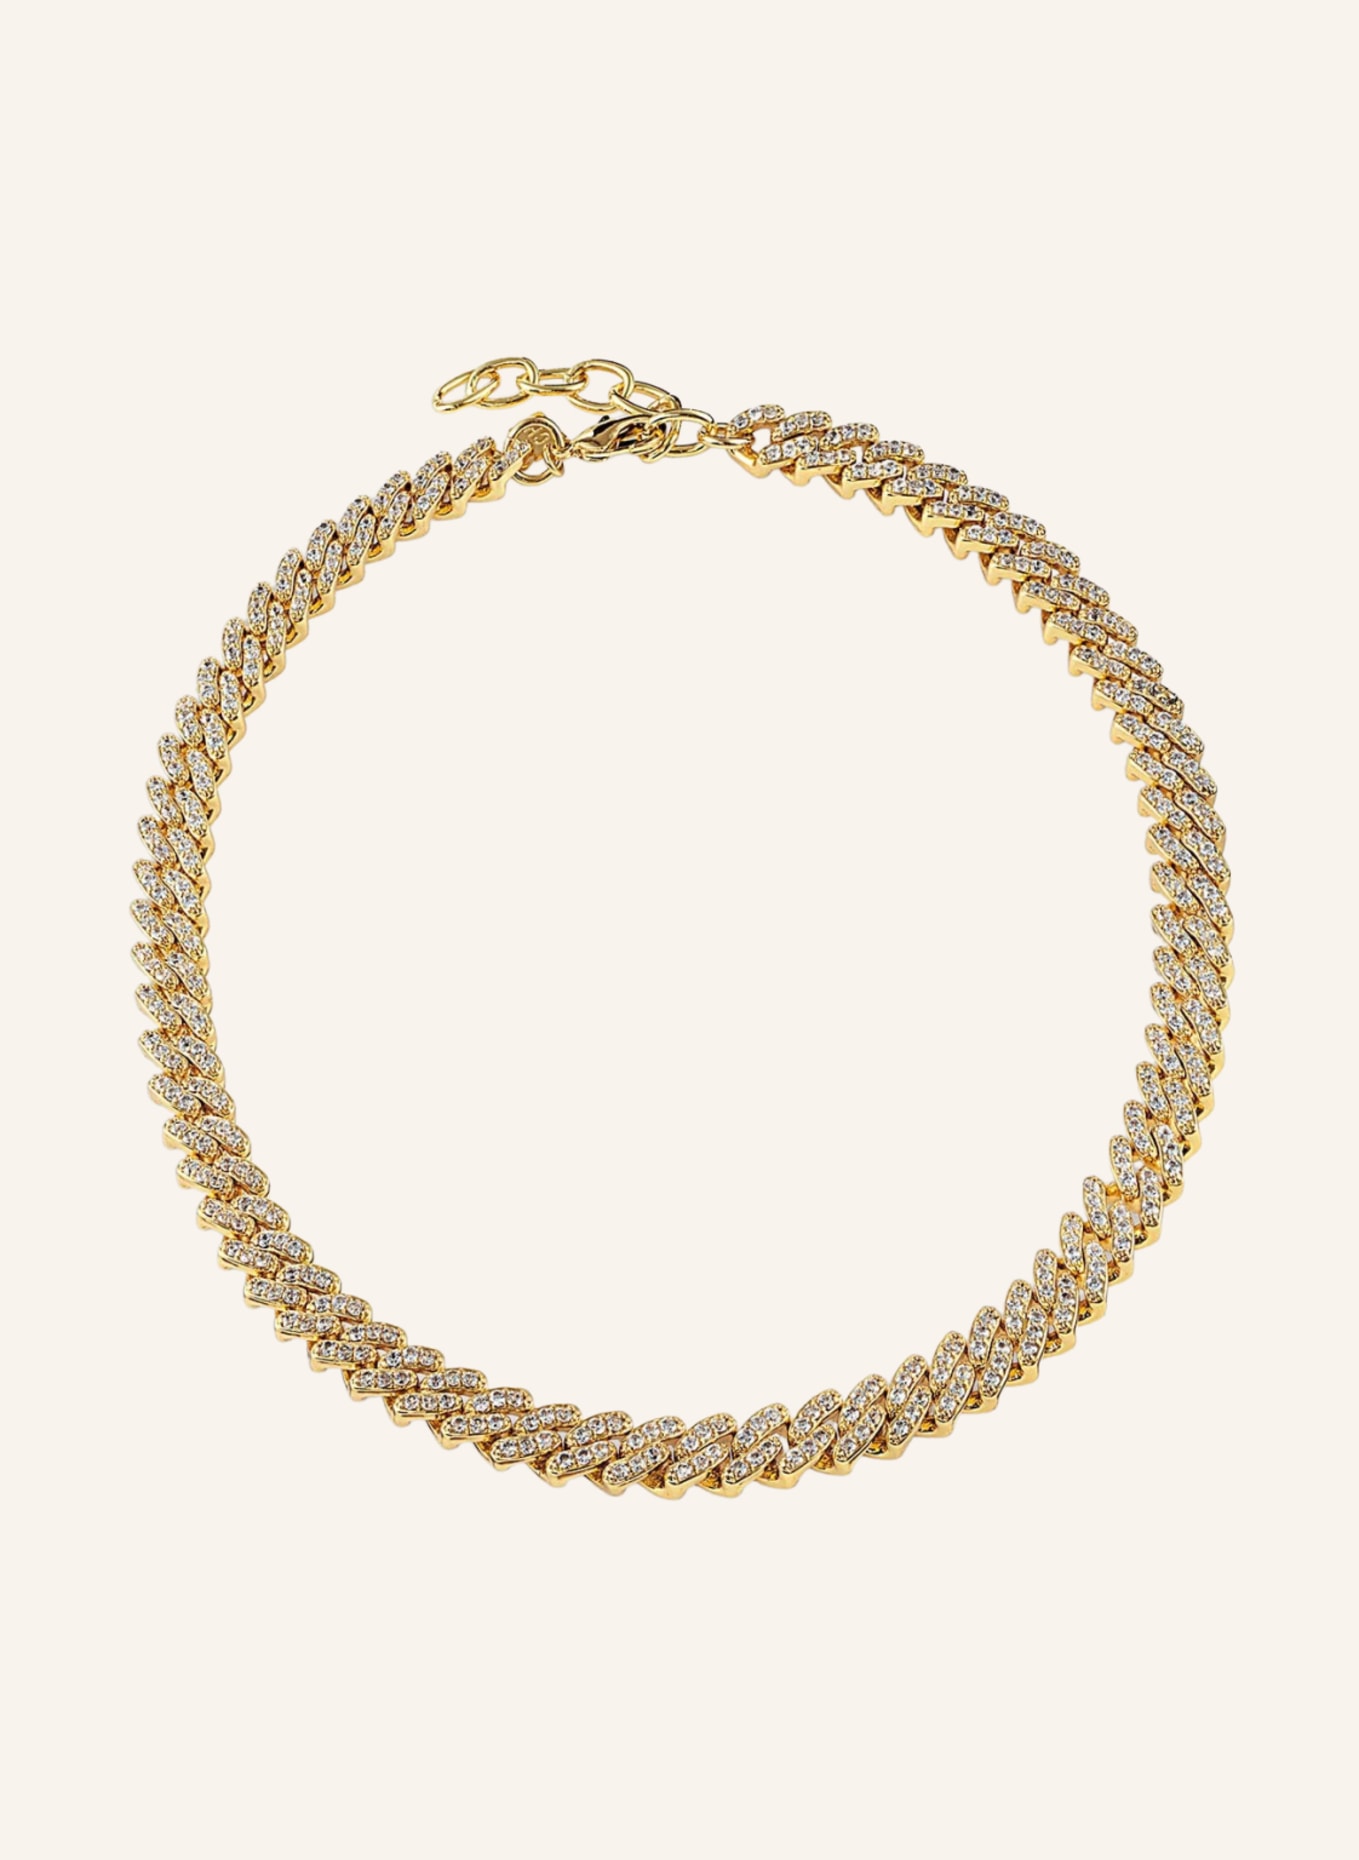 CRYSTAL HAZE Kette MEXICAN CHAIN by GLAMBOU, Farbe: GOLD (Bild 1)